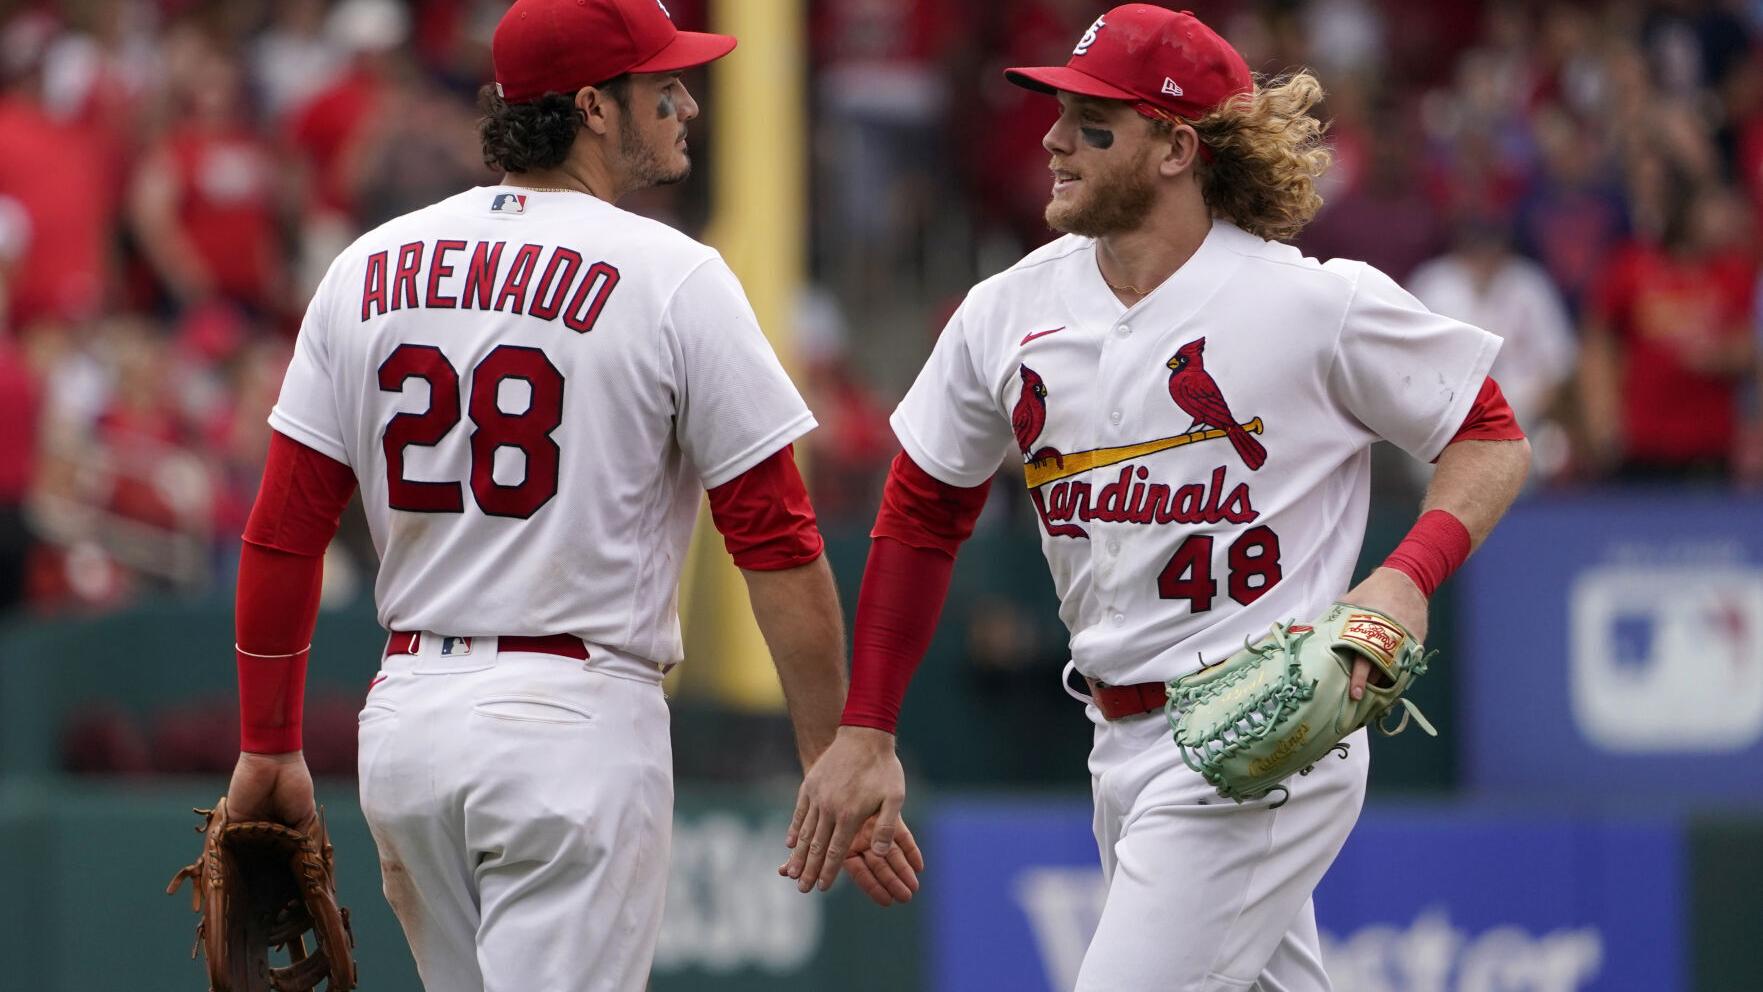 Hudson, Arenado end frustrations in 5-2 Cardinals win over San Diego